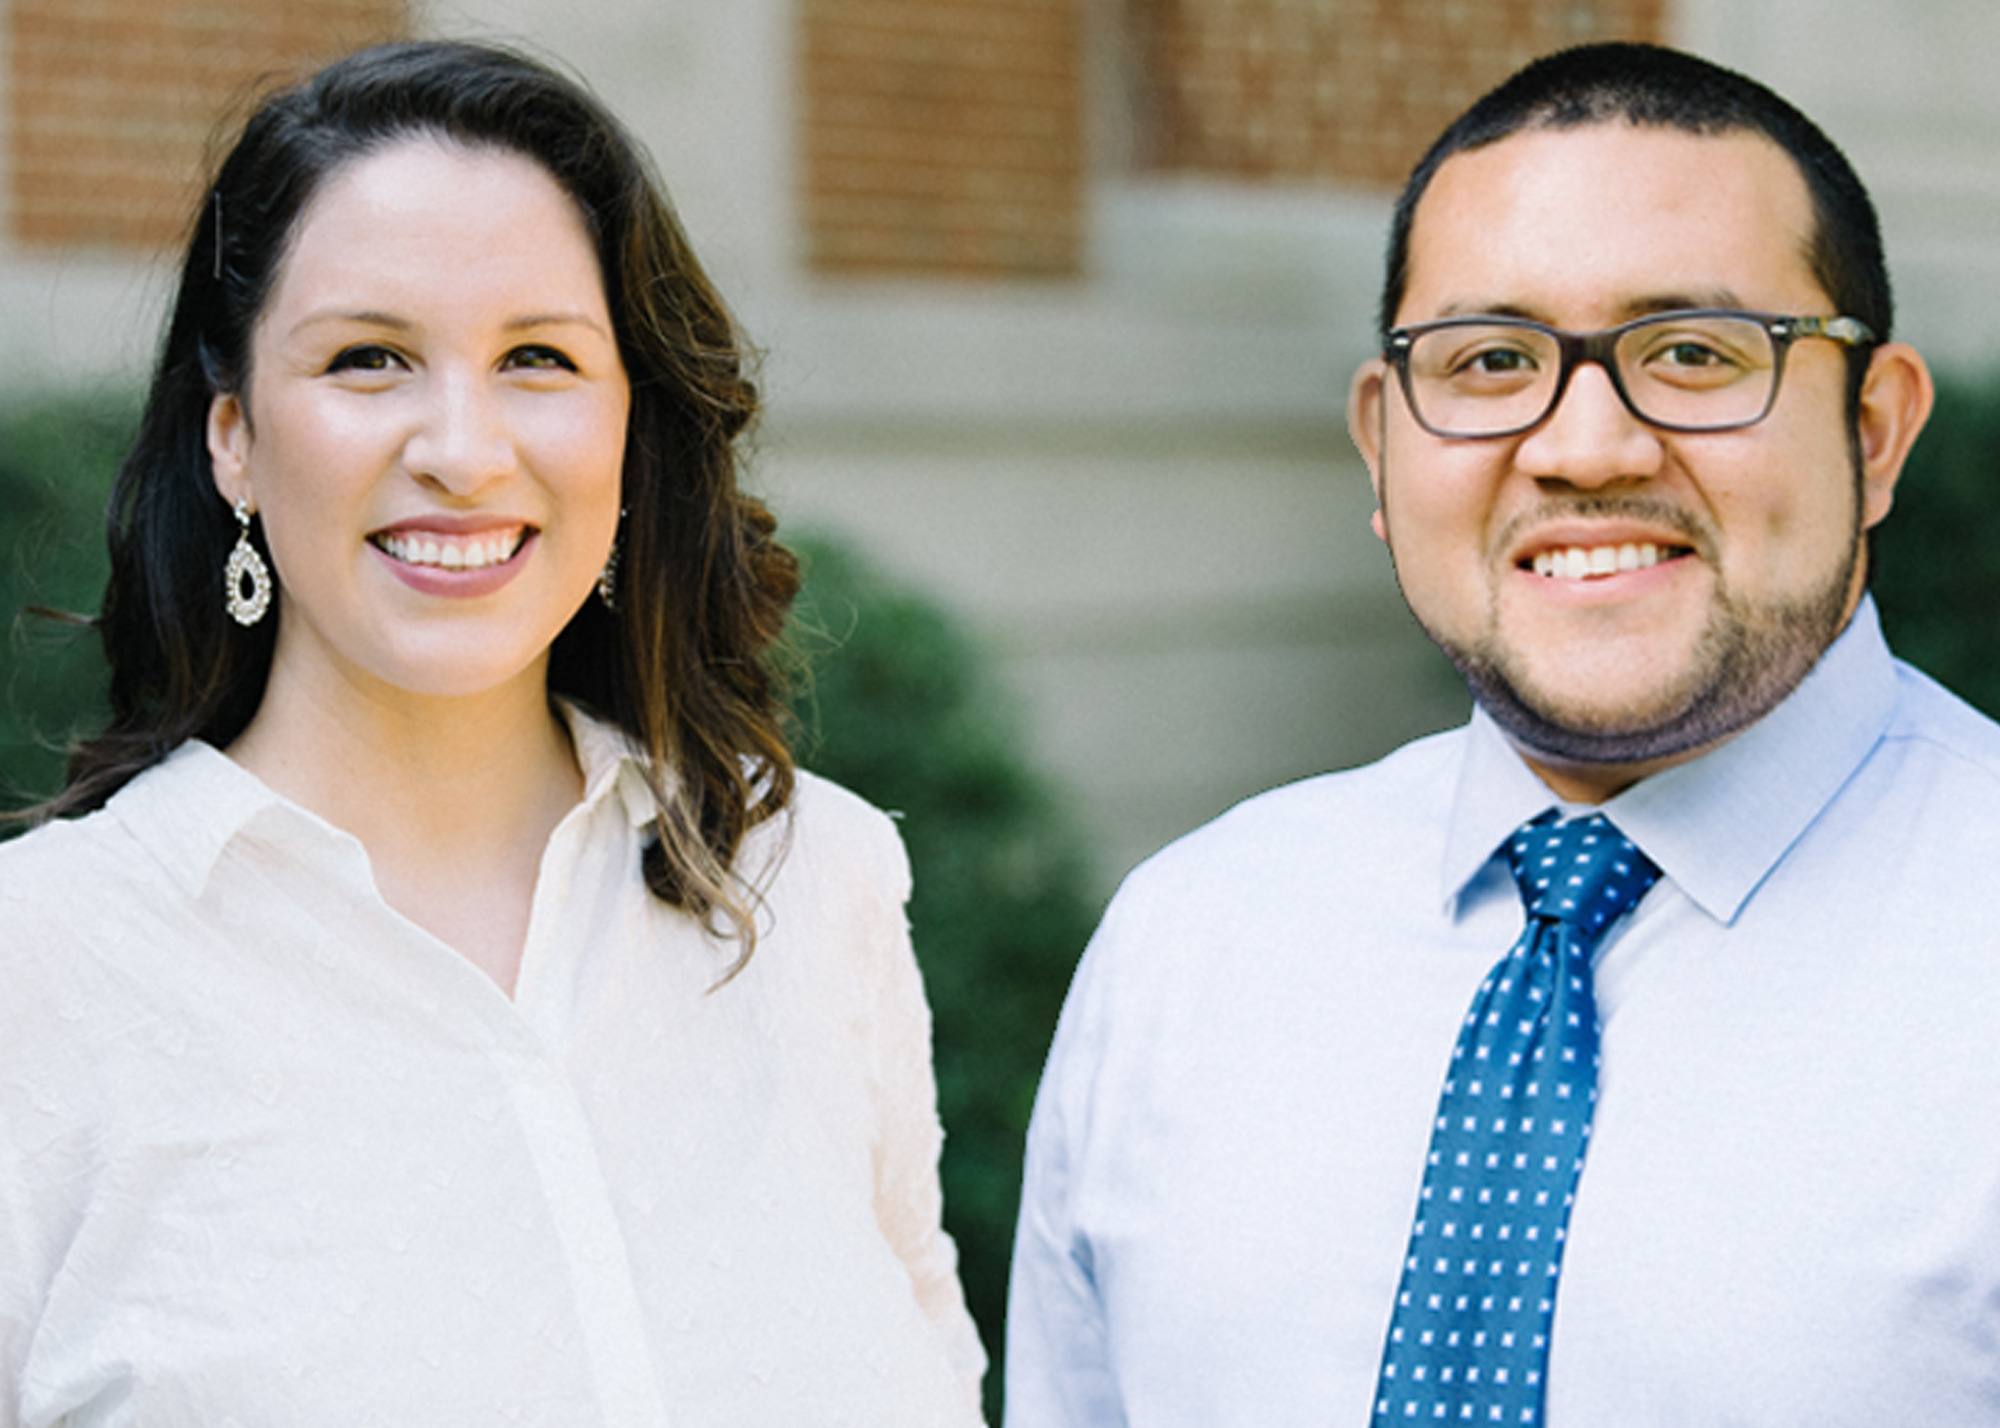 Elaine Townsend Utin and Ricky Hurtado, LatinxEd co-founders and co-directors